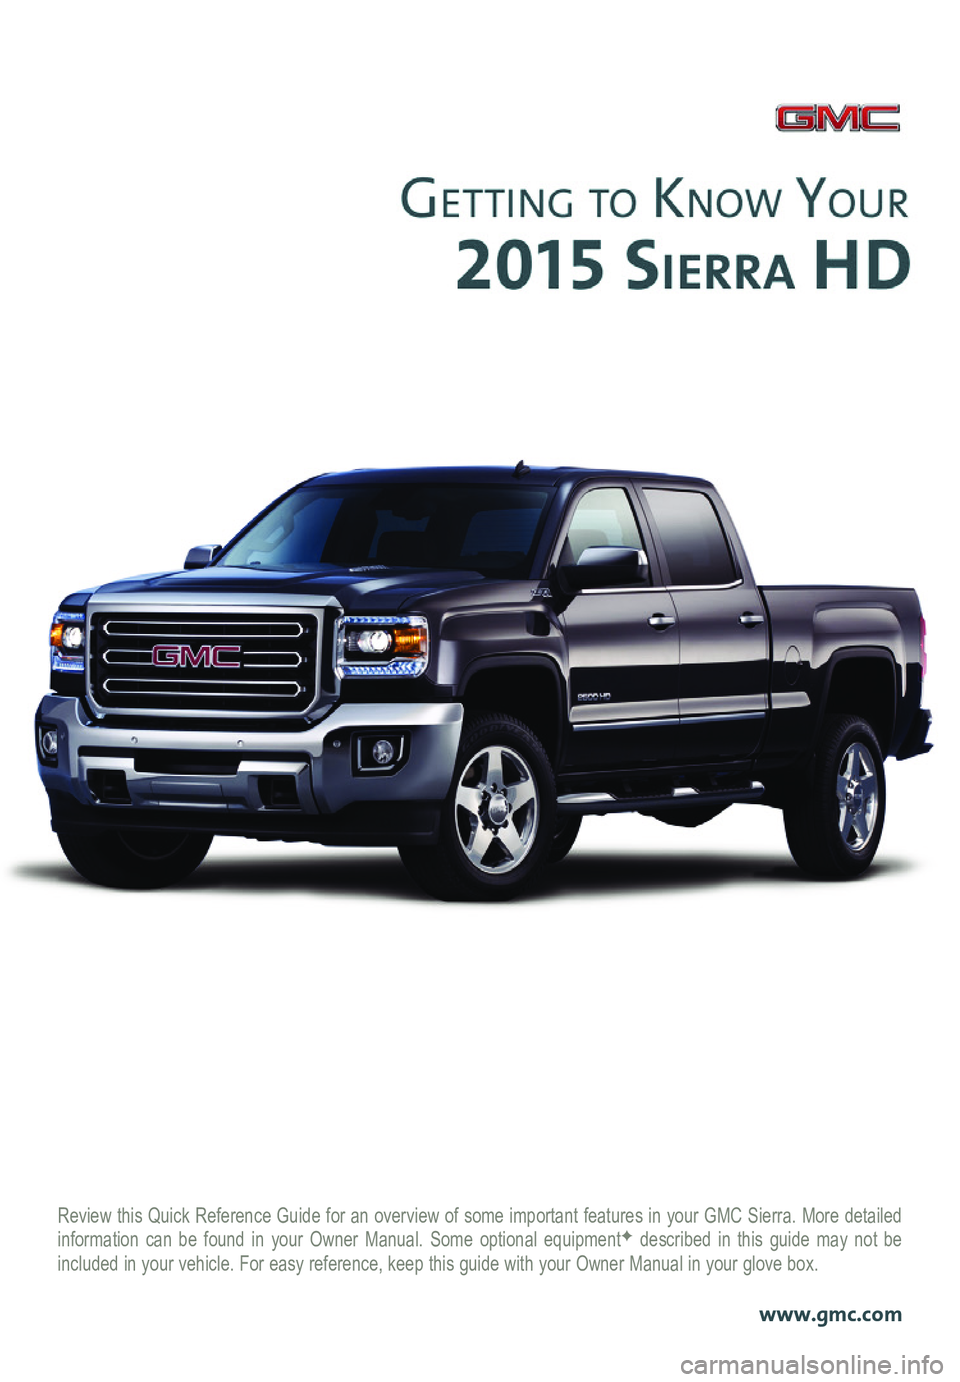 GMC SIERRA HD 2015  Get To Know Guide Review this Quick Reference Guide for an overview of some important features in your GMC Sierra. More detailed information can be found in your Owner Manual. Some optional equipmentF described in this